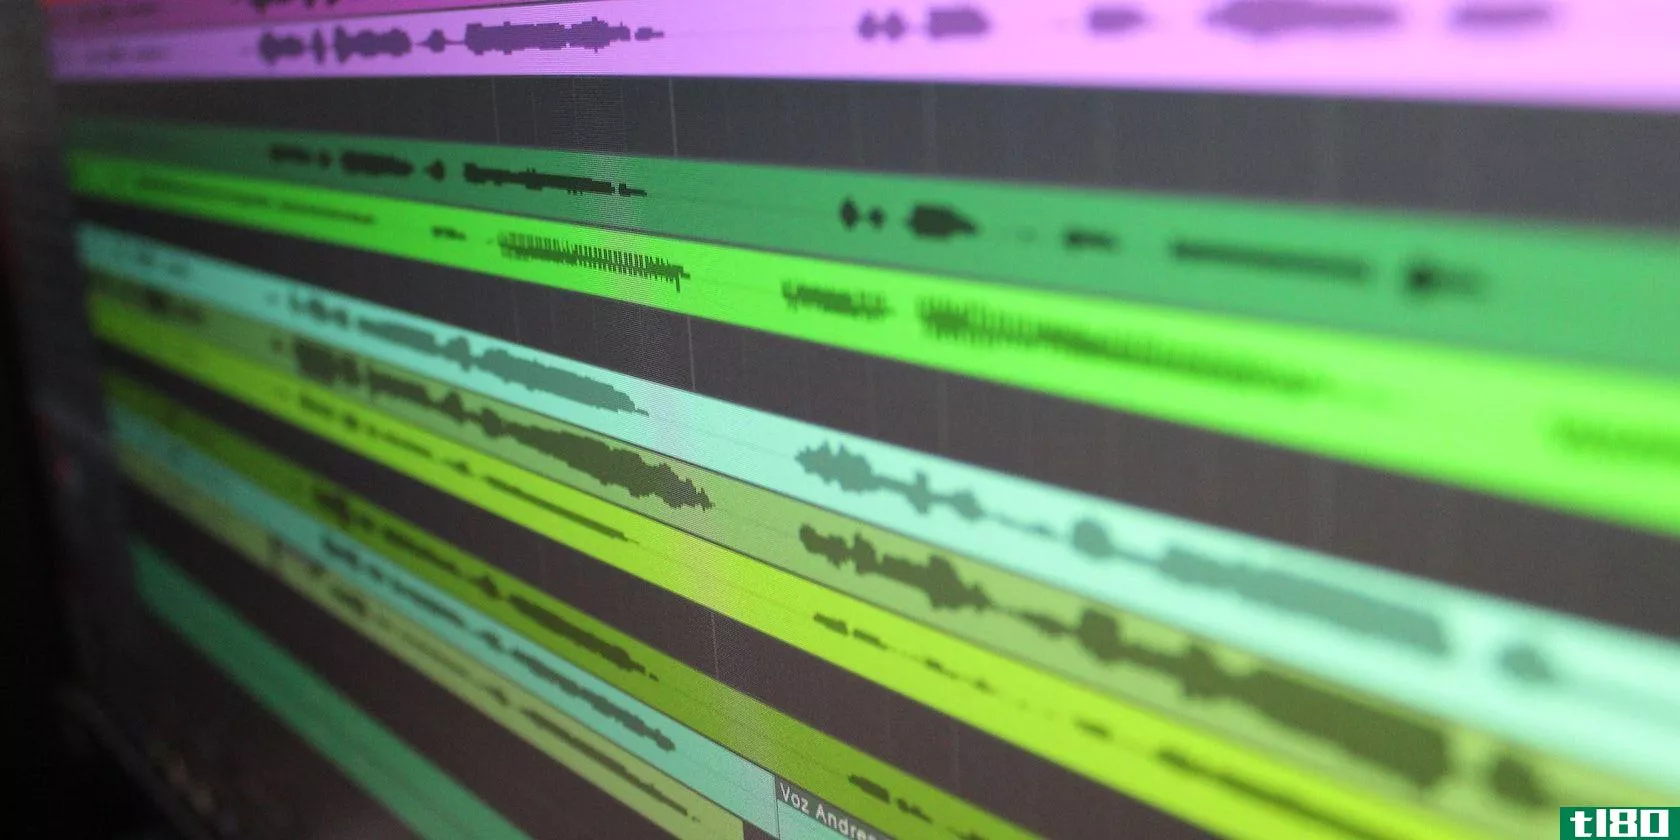 A digital audio workstation featuring multiple tracks in green and pink